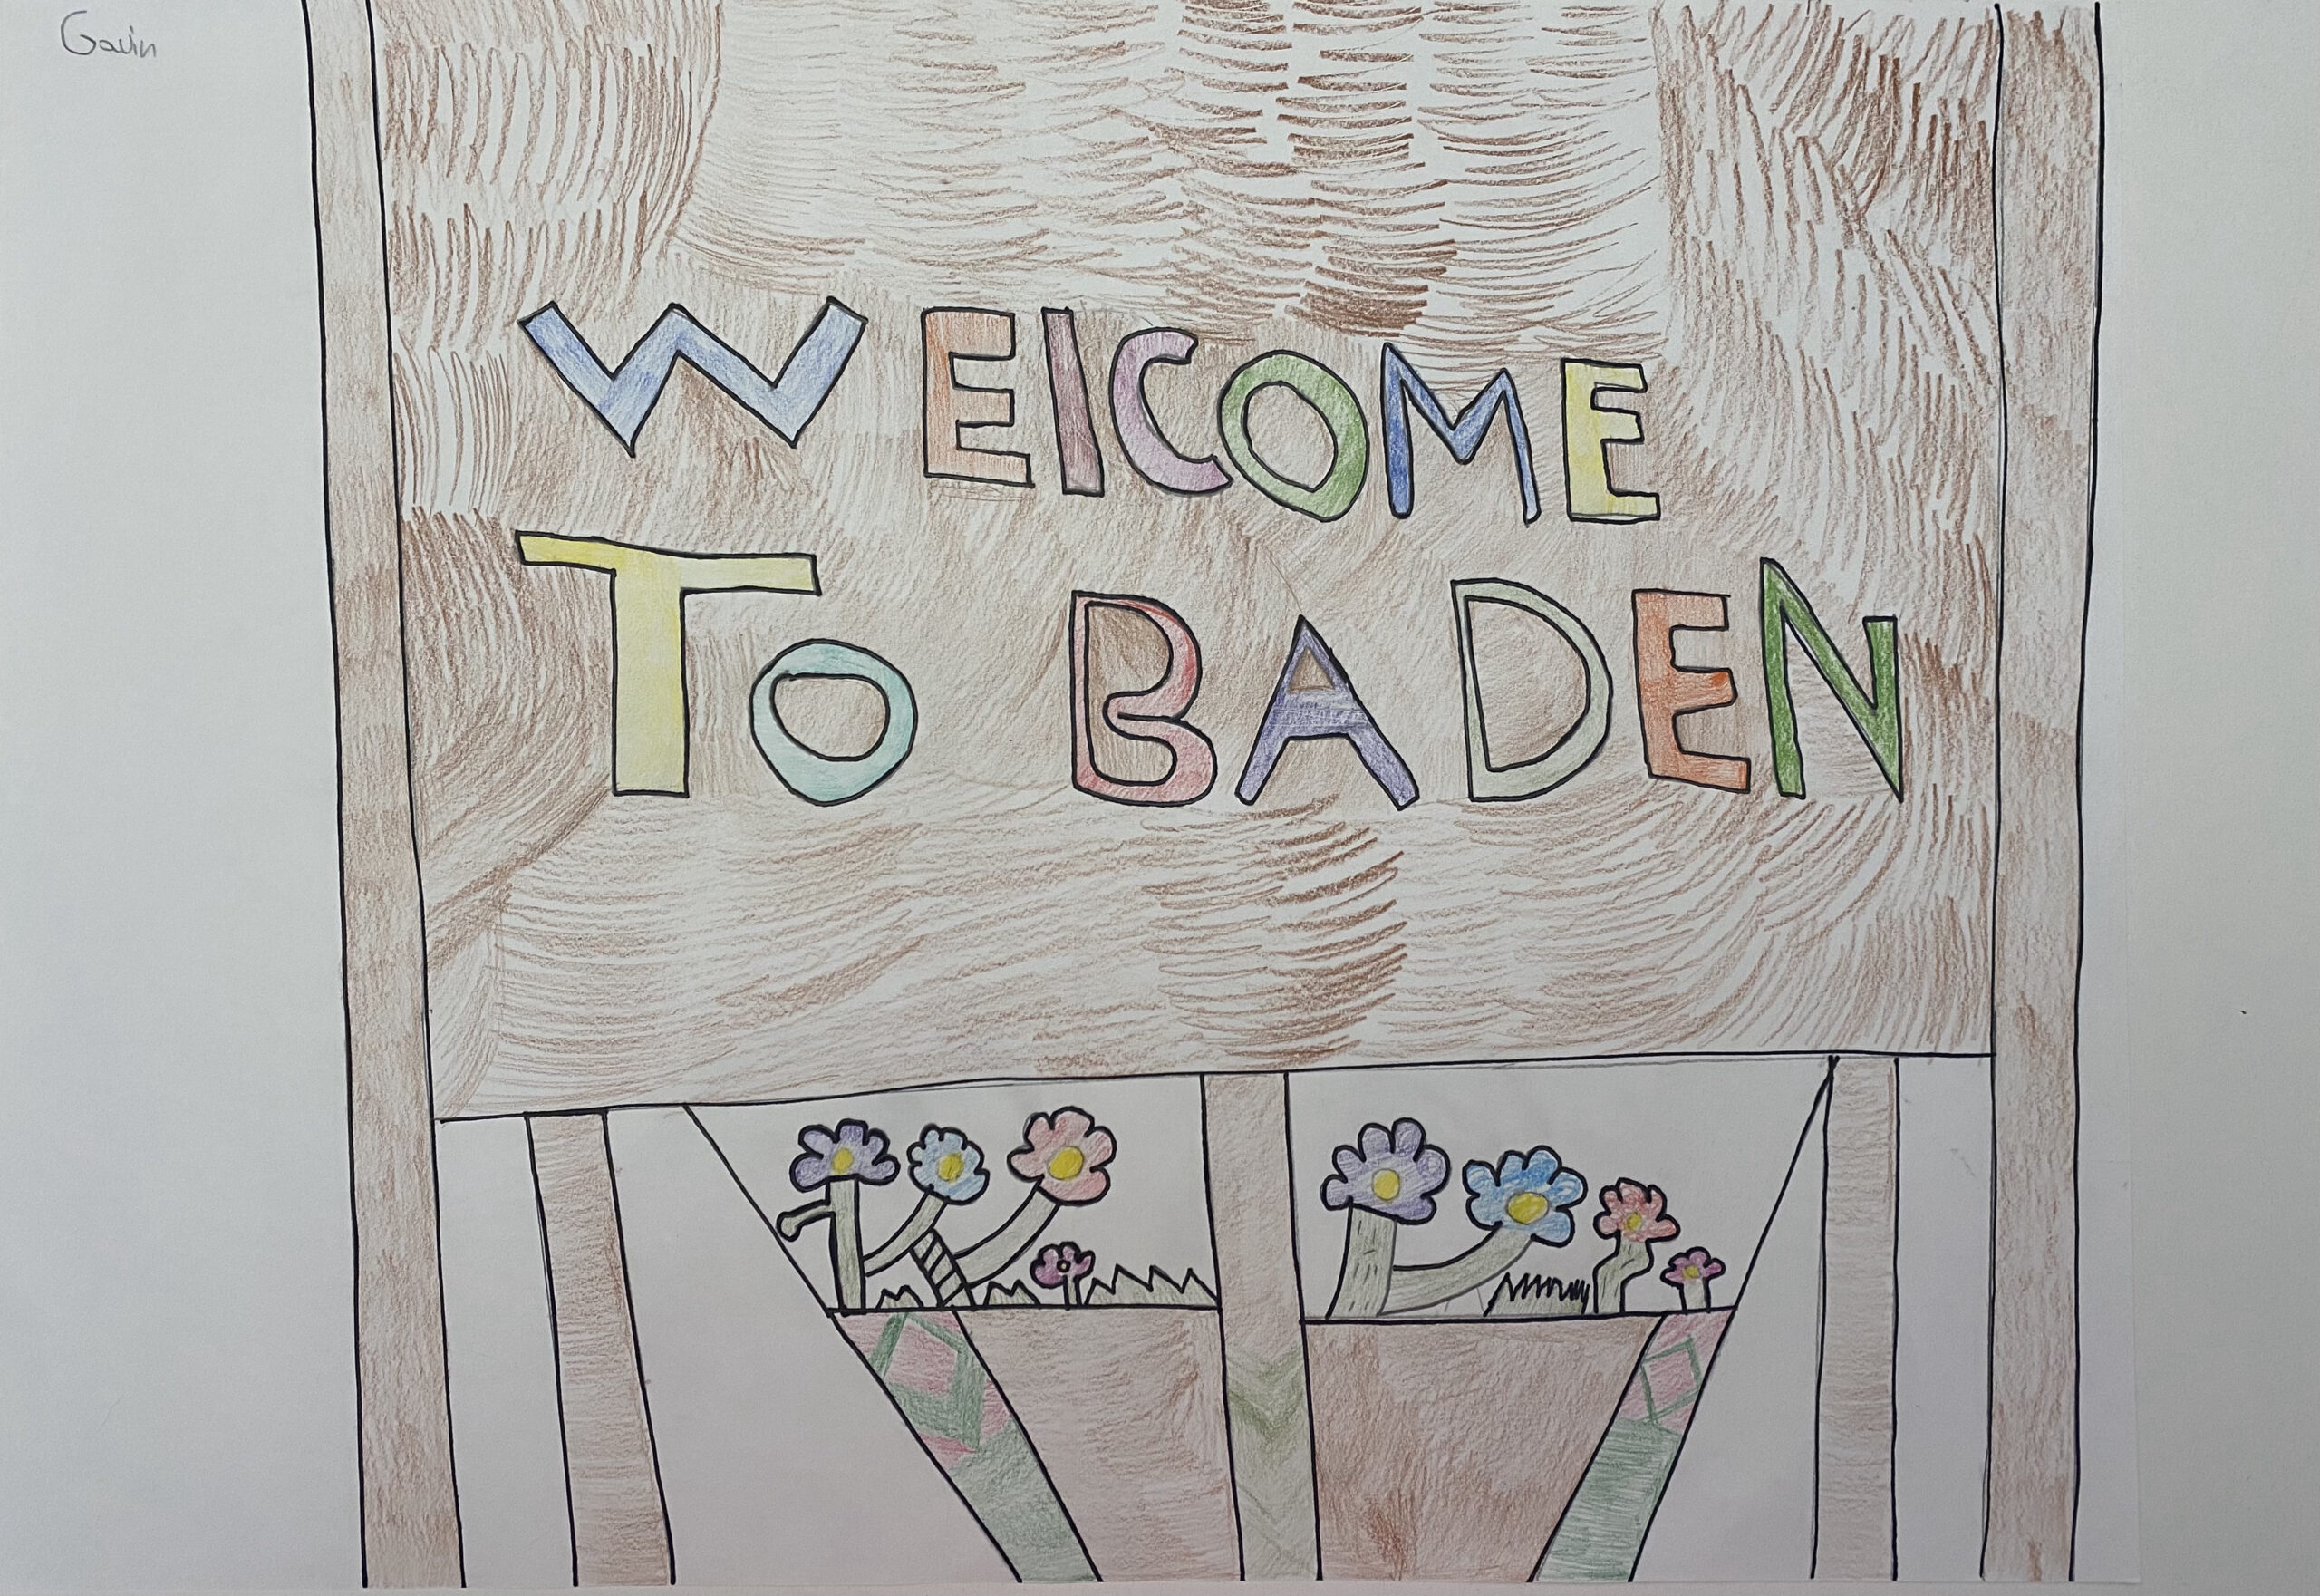 welcome to Baden sign by Gavin